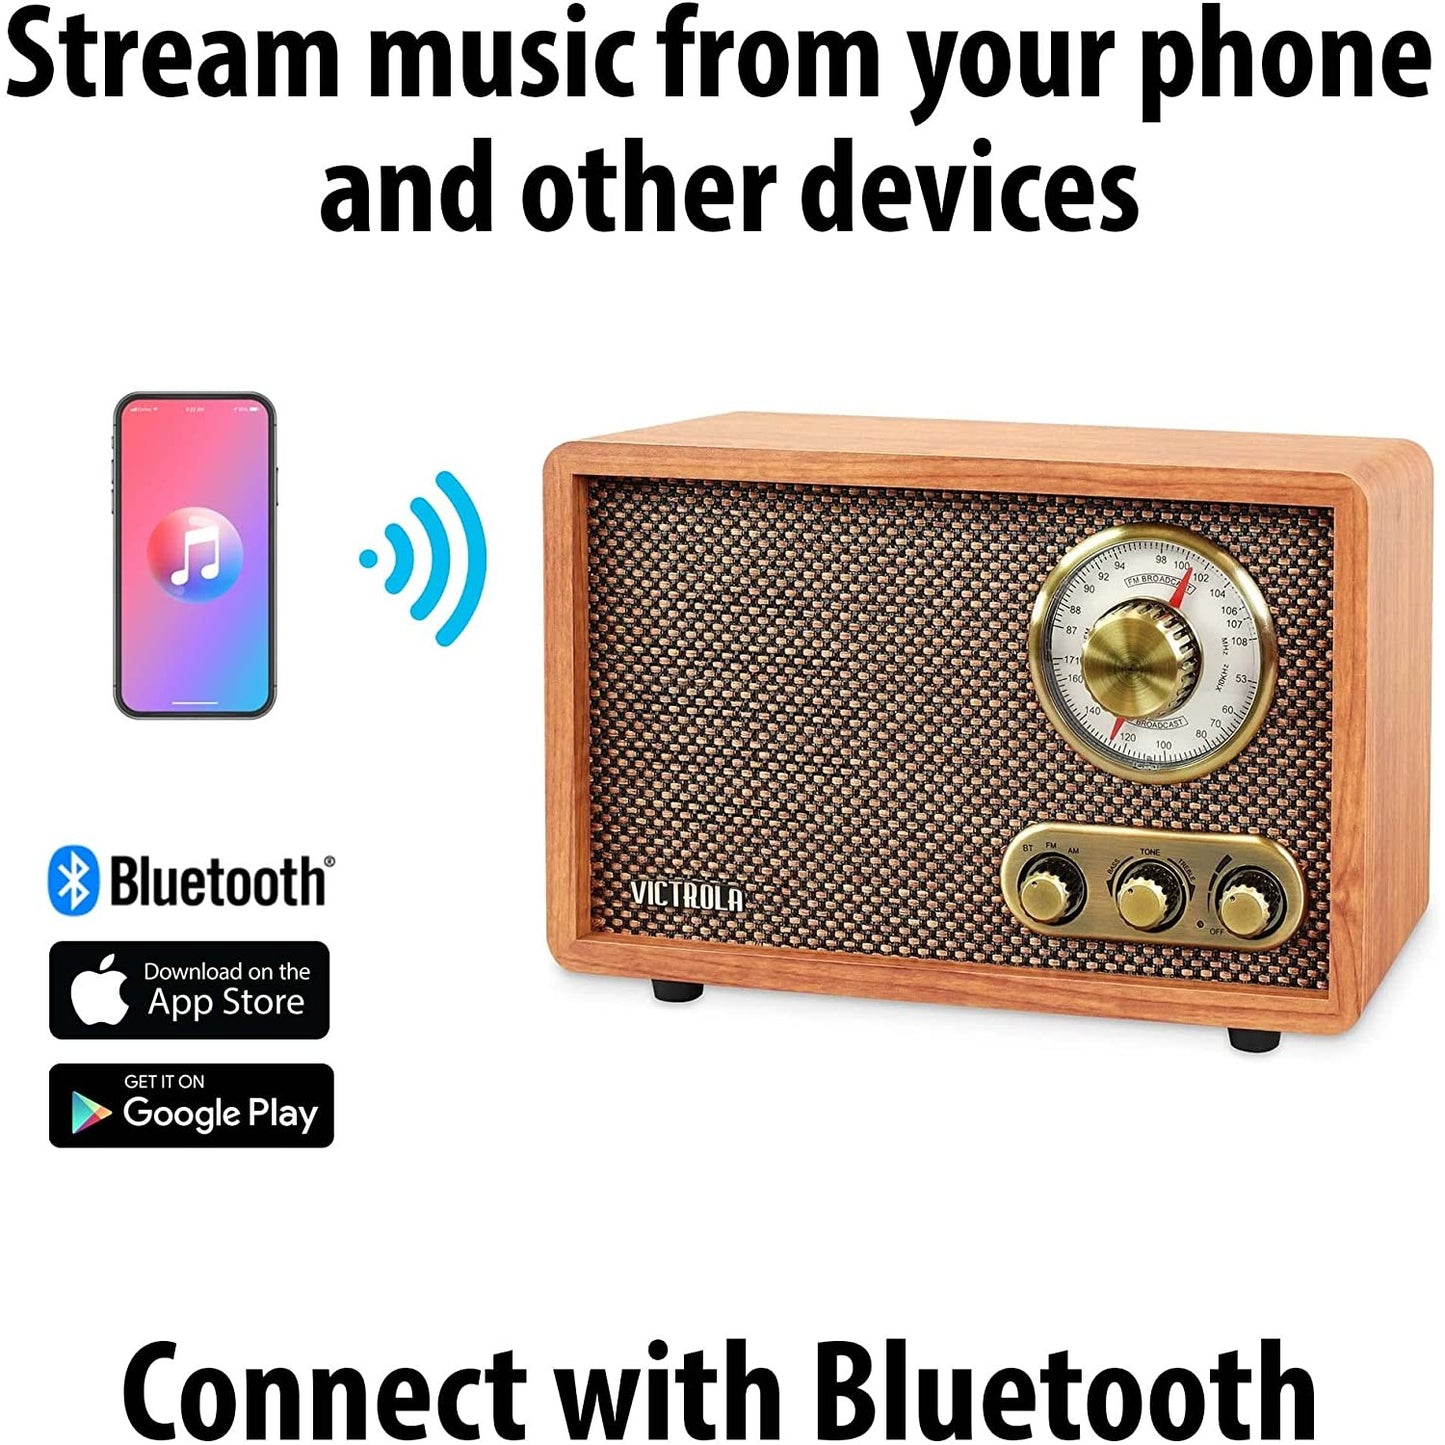 A vintage style AM/FM radio which connects with Bluetooth. The text reads, "Stream music from your phone and other devices."